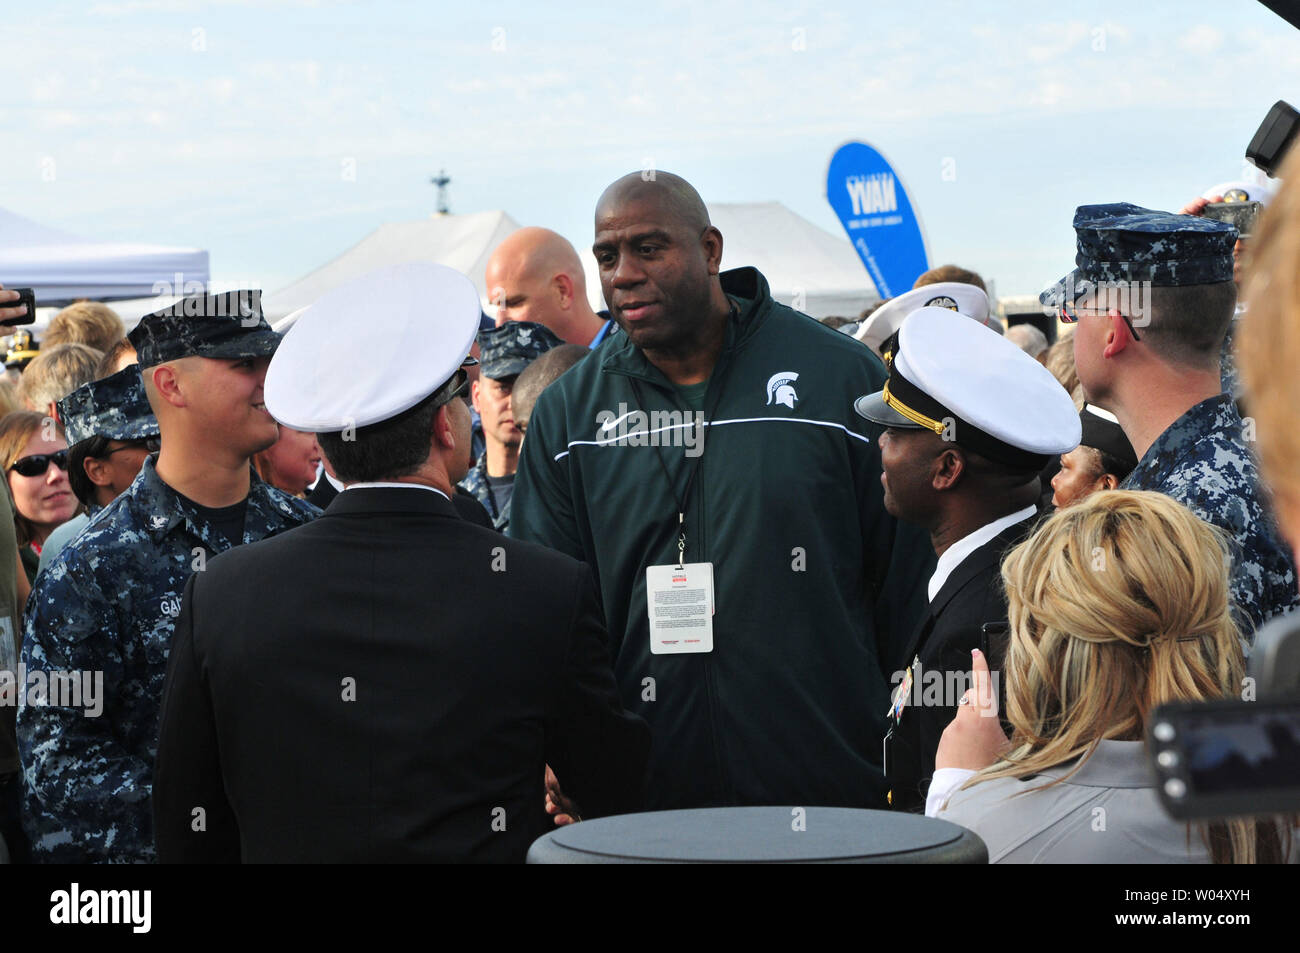 Magic Johnson greets service members attending the inaugural Quicken Loans Carrier Classic basketball game Friday, November 11, 2011 on the flight deck of the aircraft carrier USS Carl Vinson (CVN 70) in San Diego, California.   Michigan State University and the University of North Carolina tipped off the  Carrier Classic, which is a celebration of Veterans Day.   UPI/James R. Evans/Navy Stock Photo